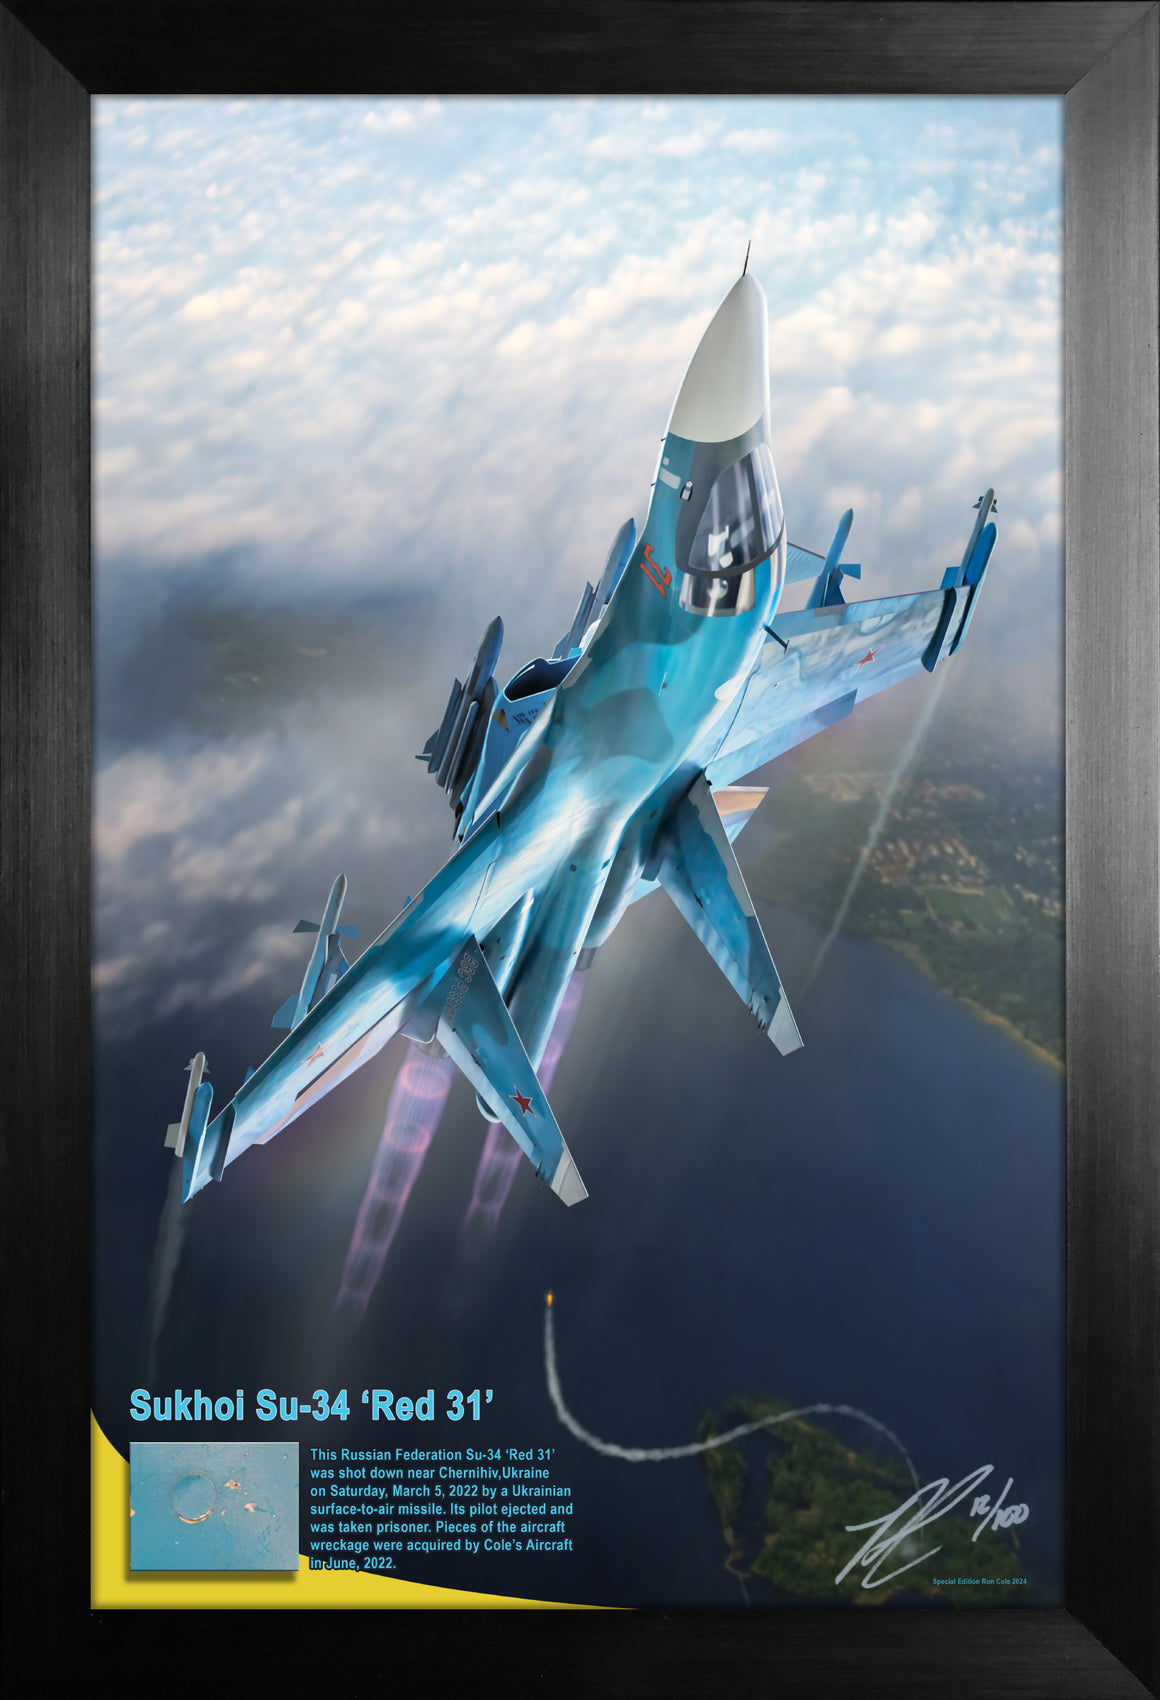 Russian Federation Sukhoi Su-34 Fullback 'Red 31' Ukraine Combat Loss Relic Display by Ron Cole